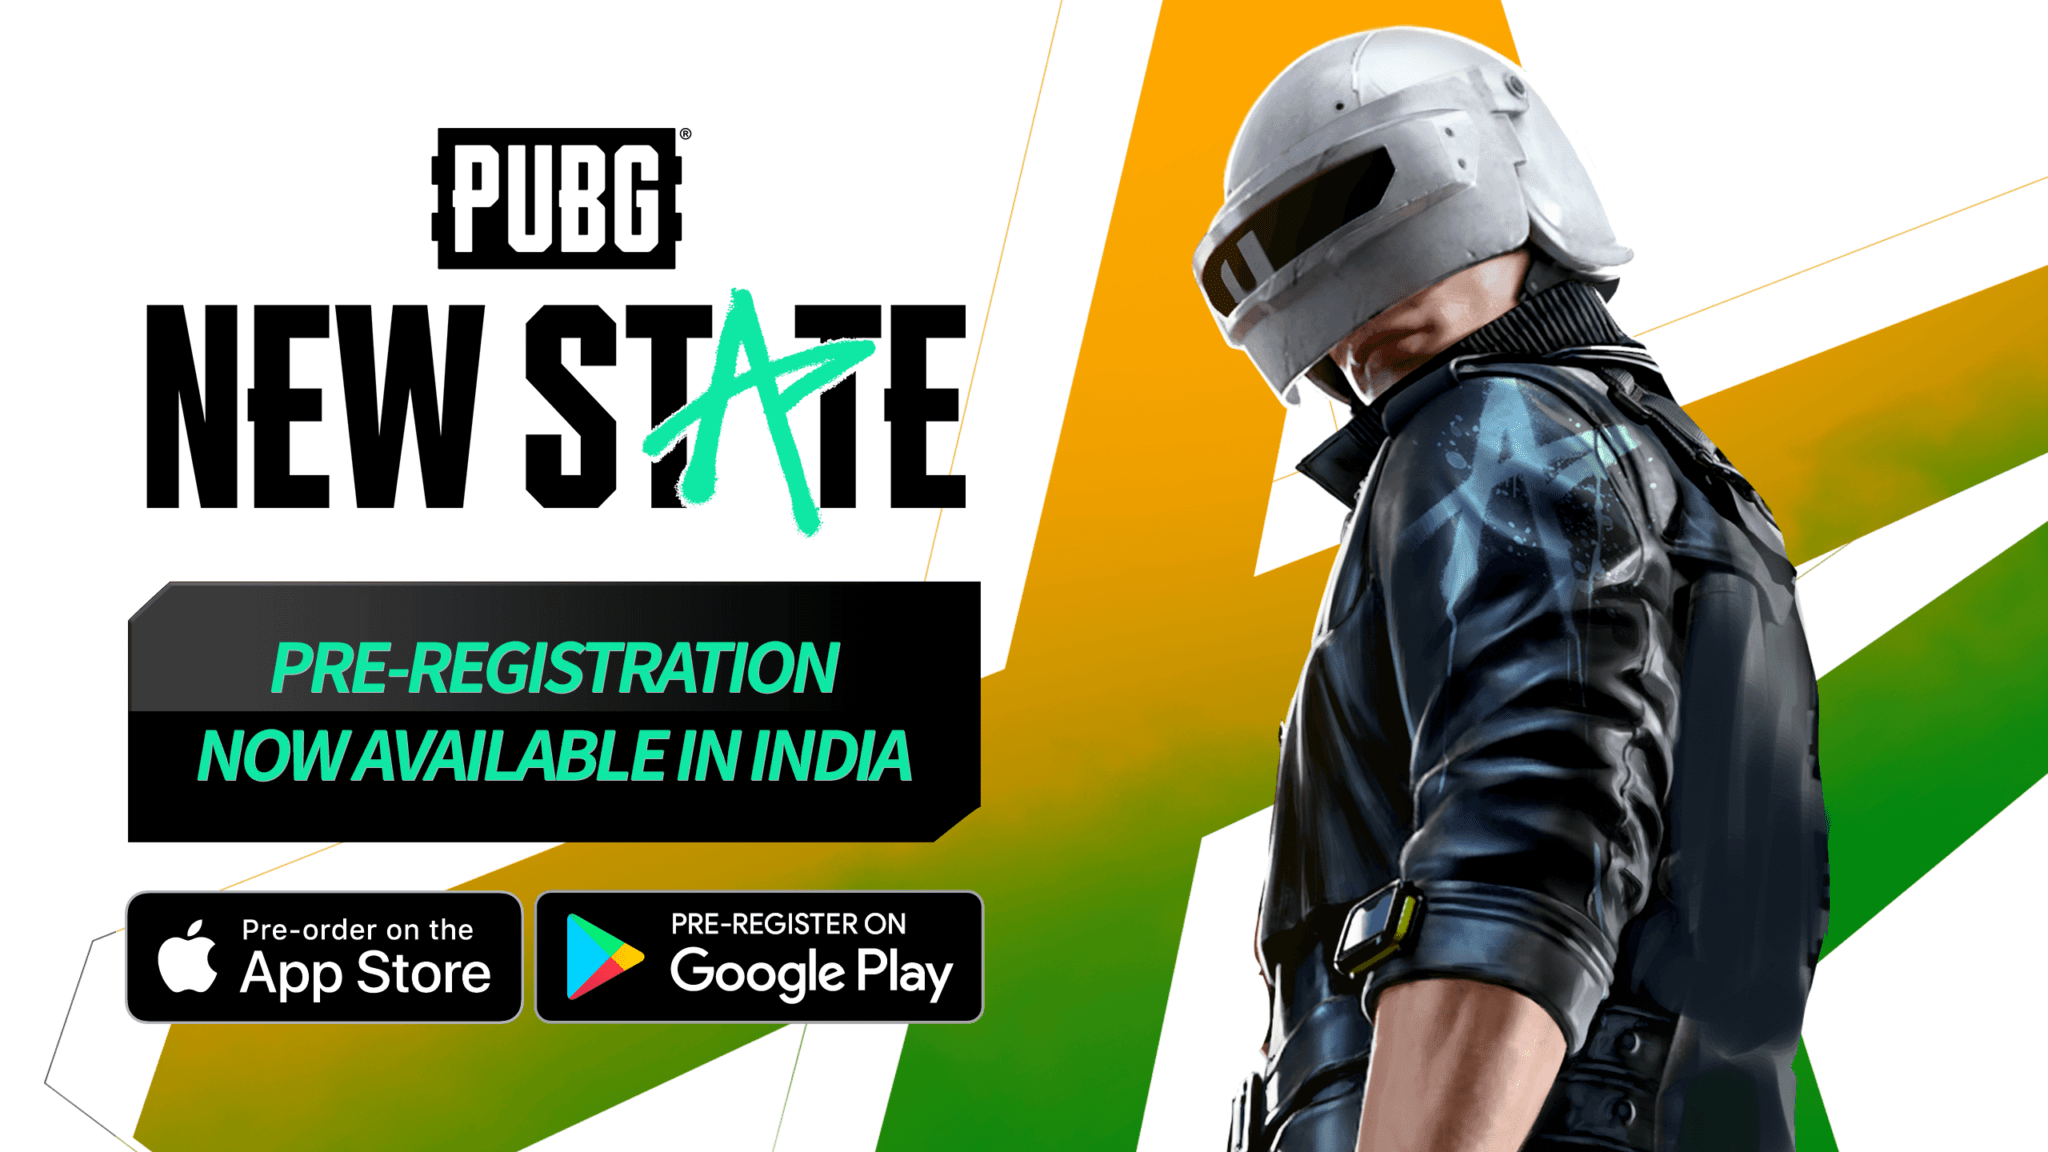 PUBG New State pre-registration in India begins for Android and iOS users